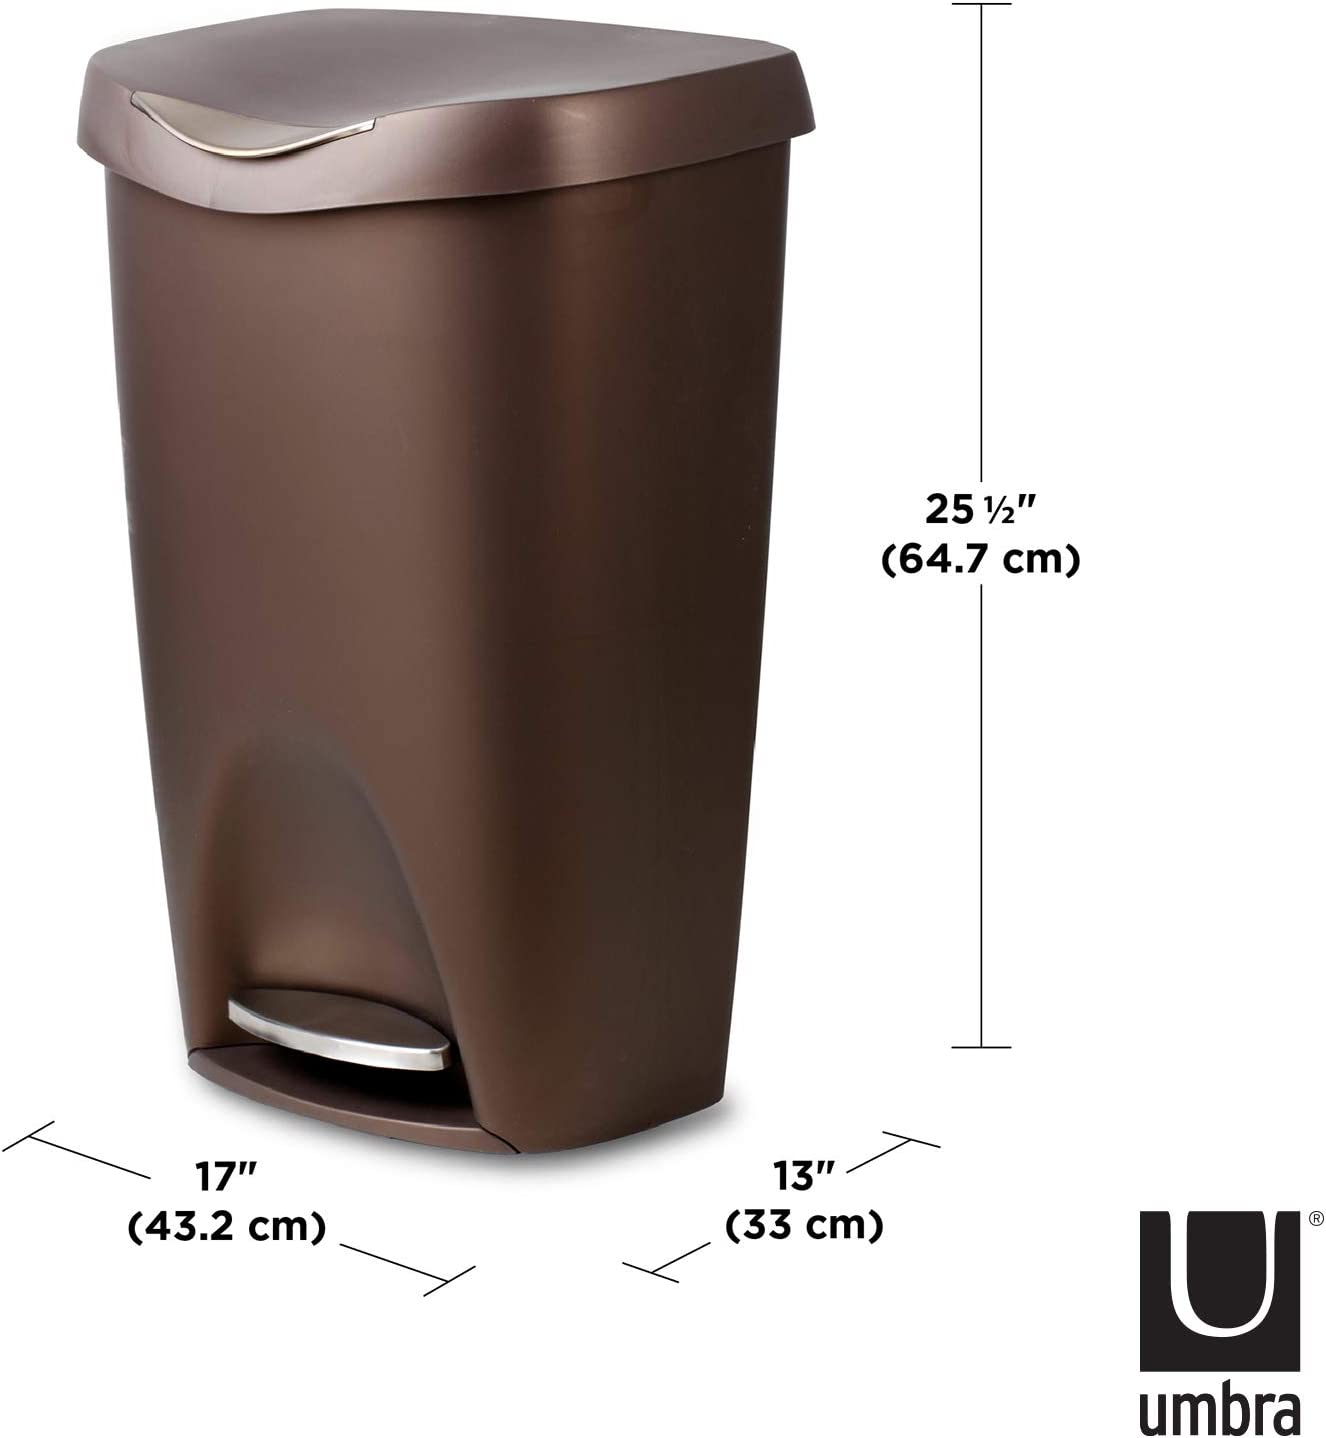 13 Gallon Stainless Steel Step Can with Soft Closing Lid - Bronze